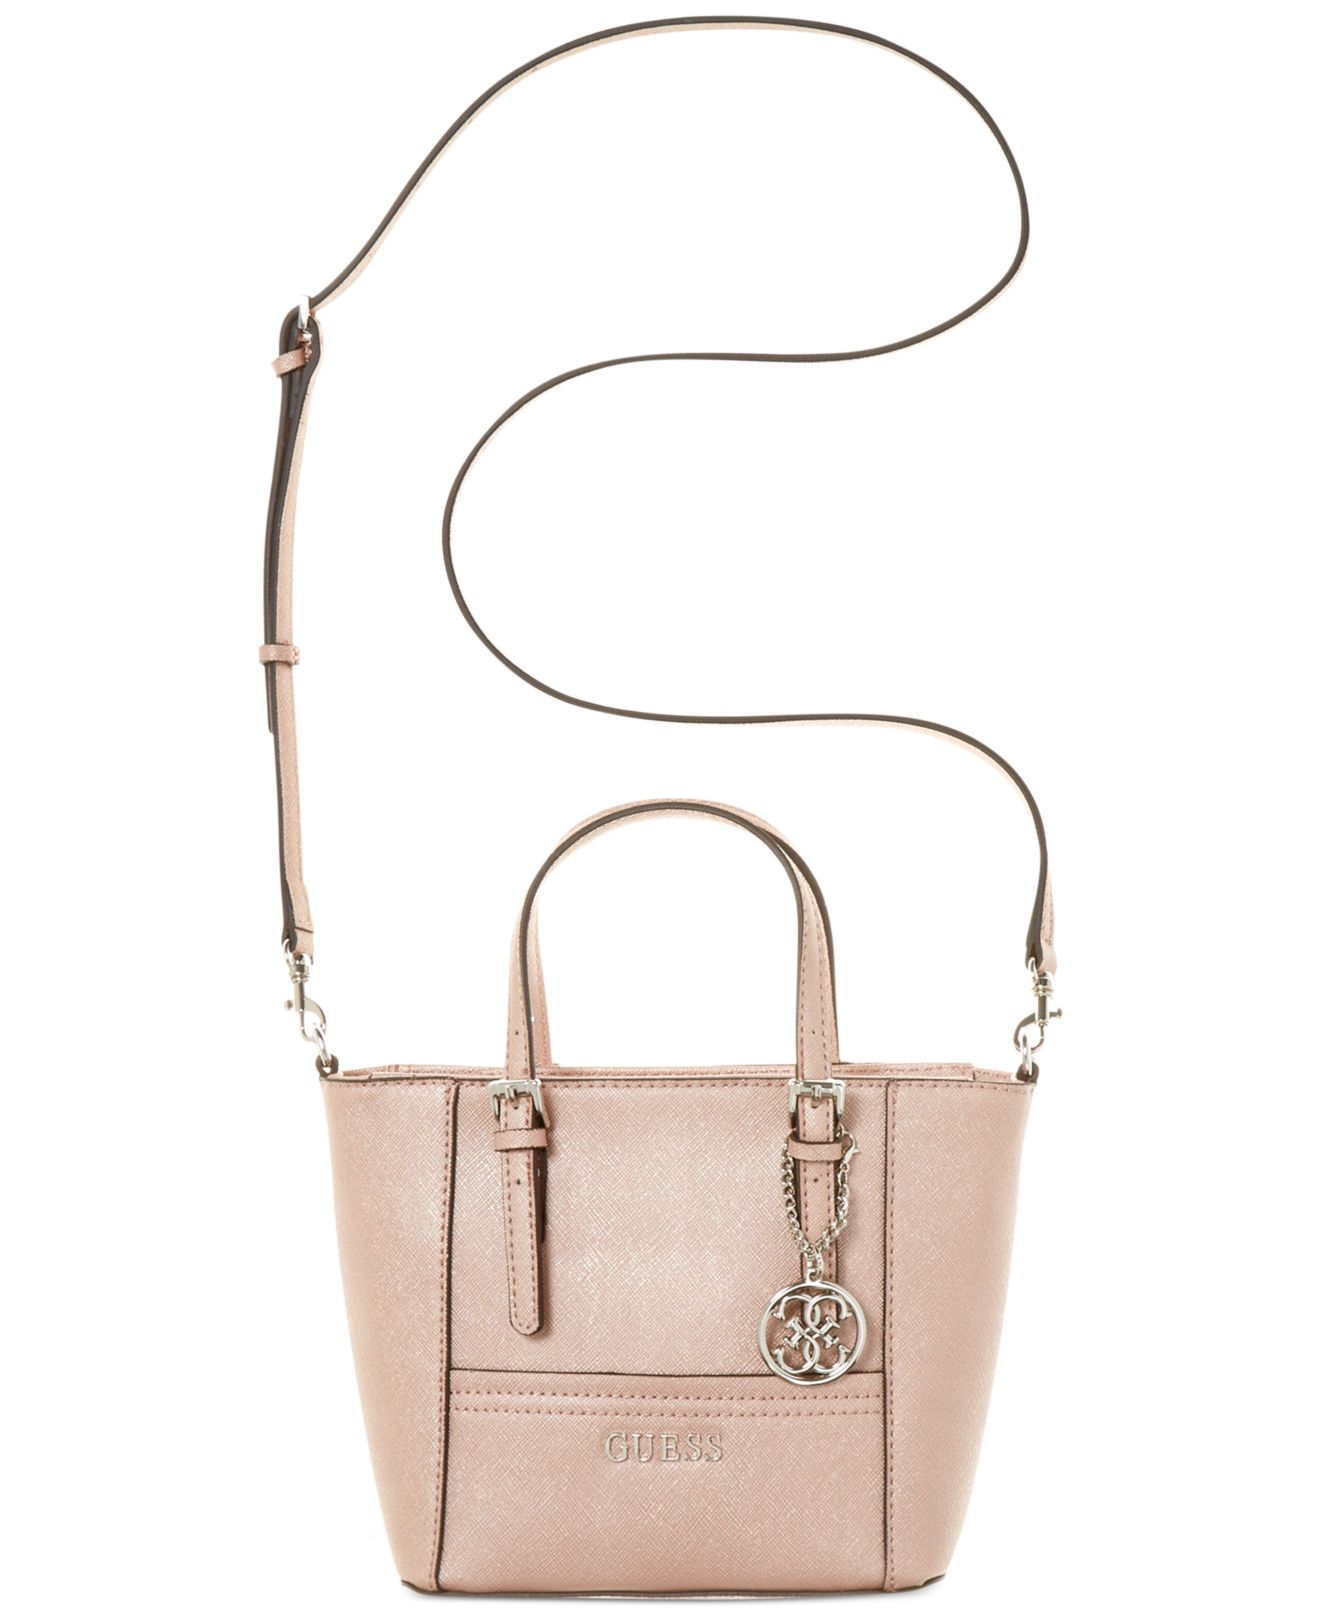 Lyst - Guess Delaney Petite Tote With Crossbody Strap in Pink